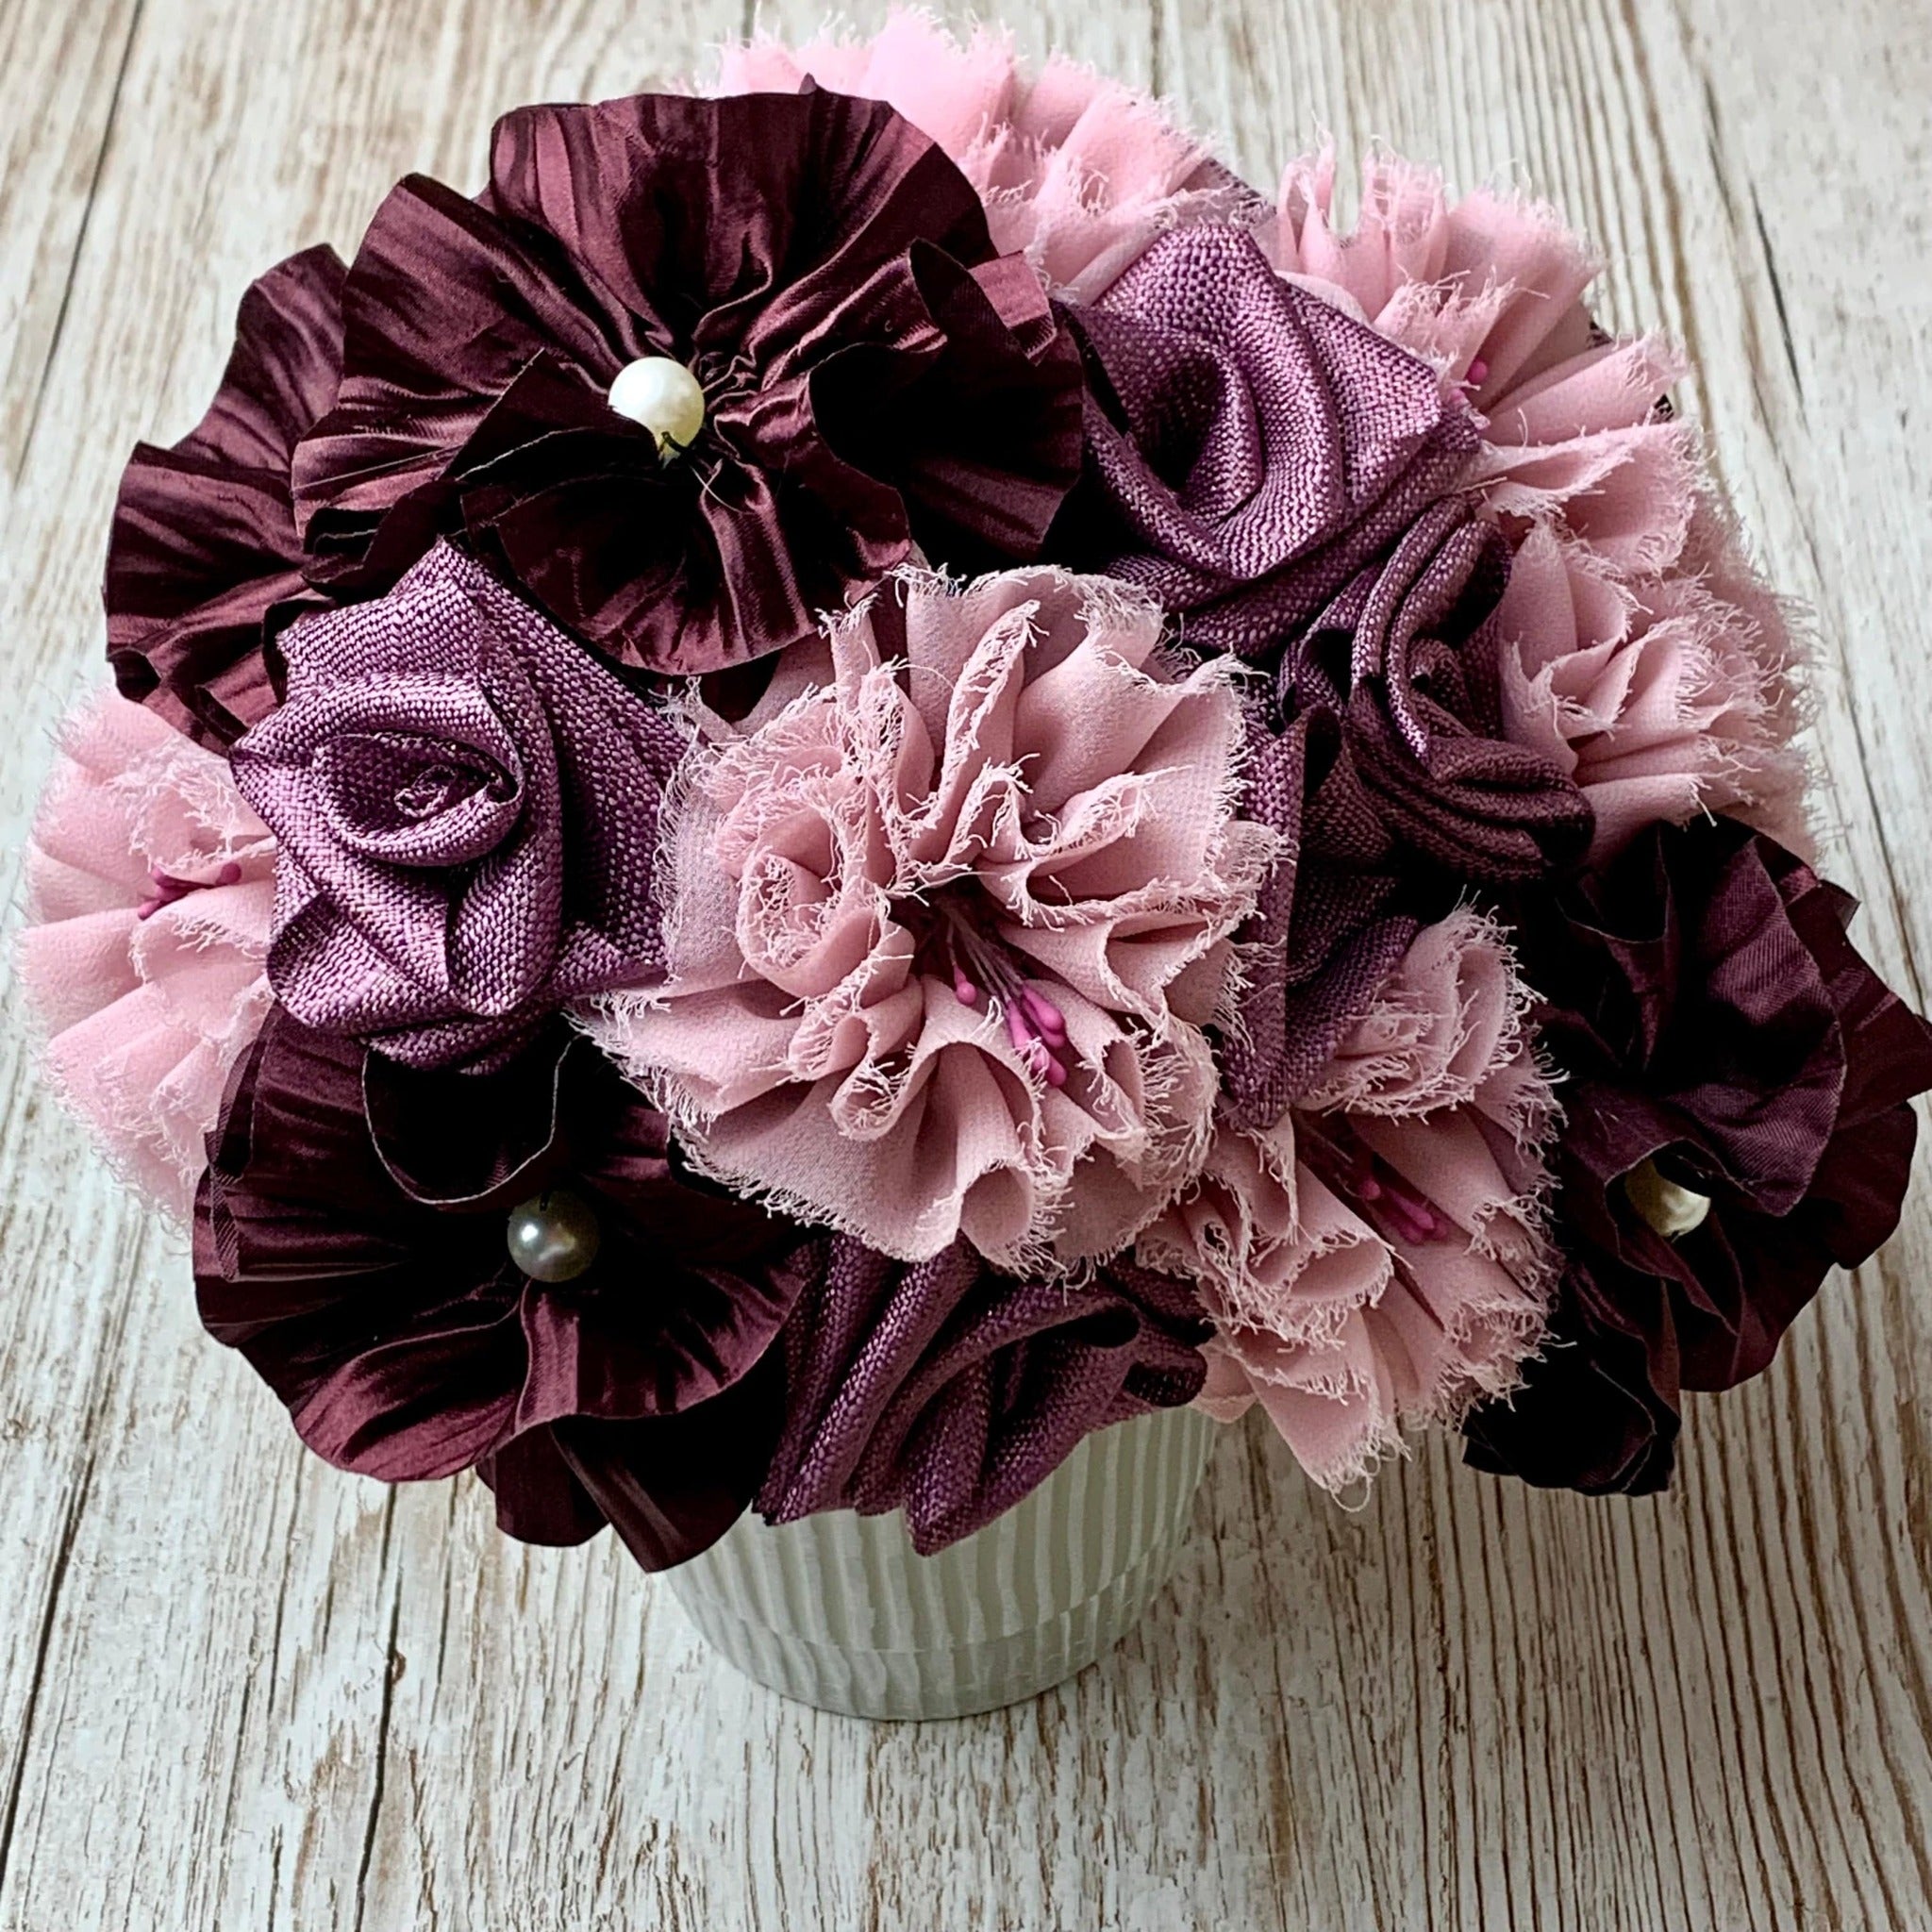 Ribbonly Amethyst Mixed Flower Bouquet